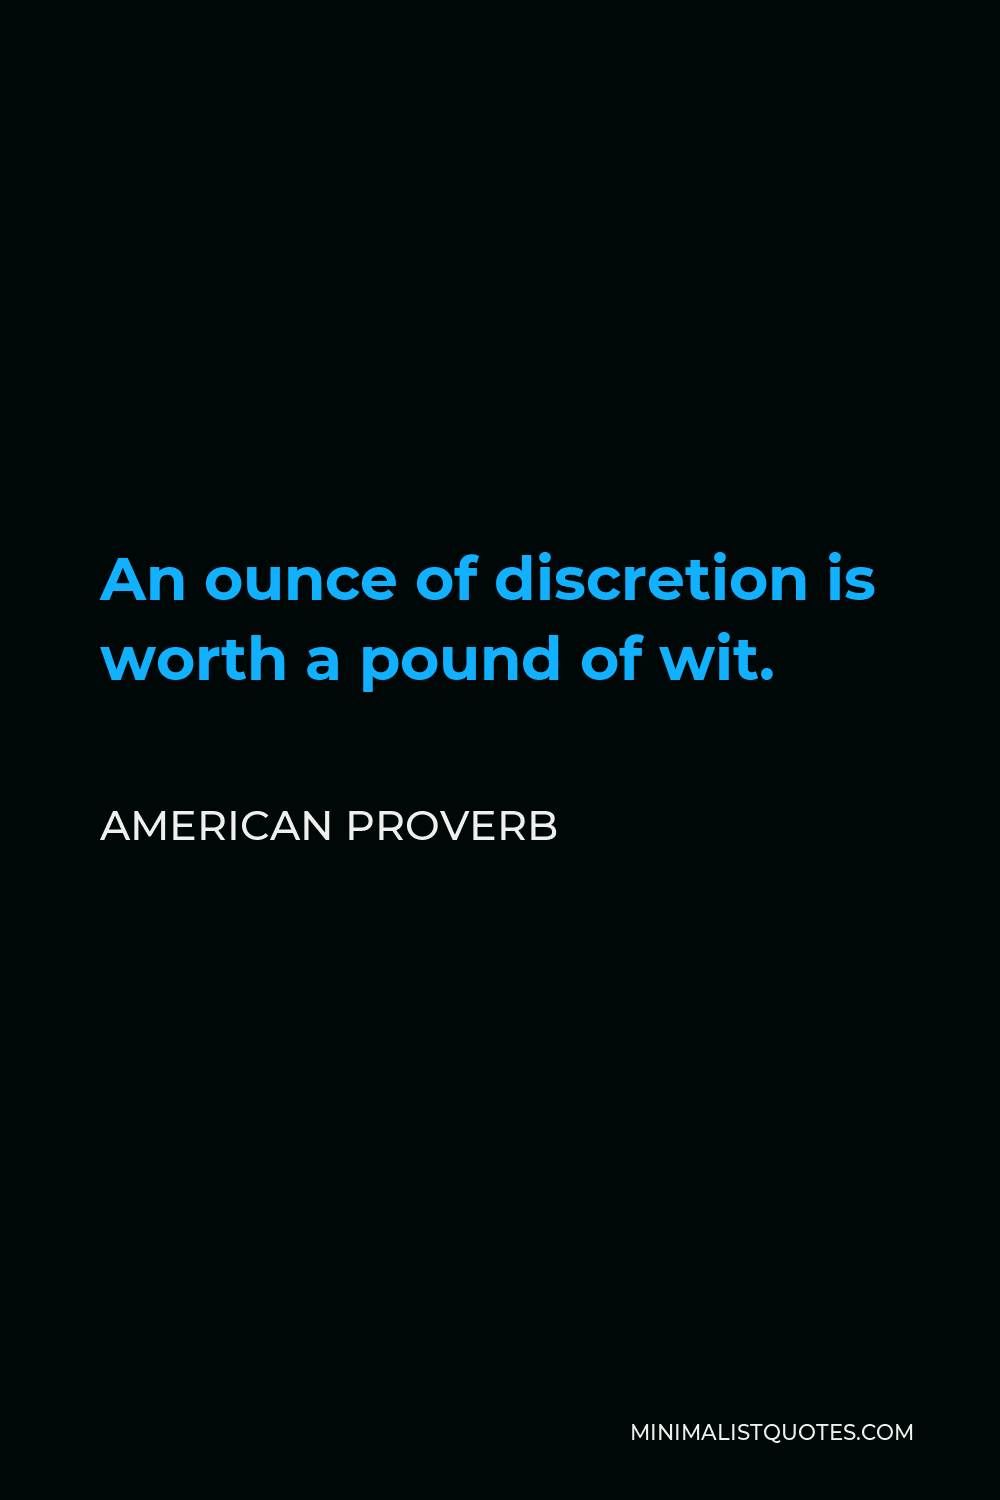 American Proverb Quote - An ounce of discretion is worth a pound of wit.